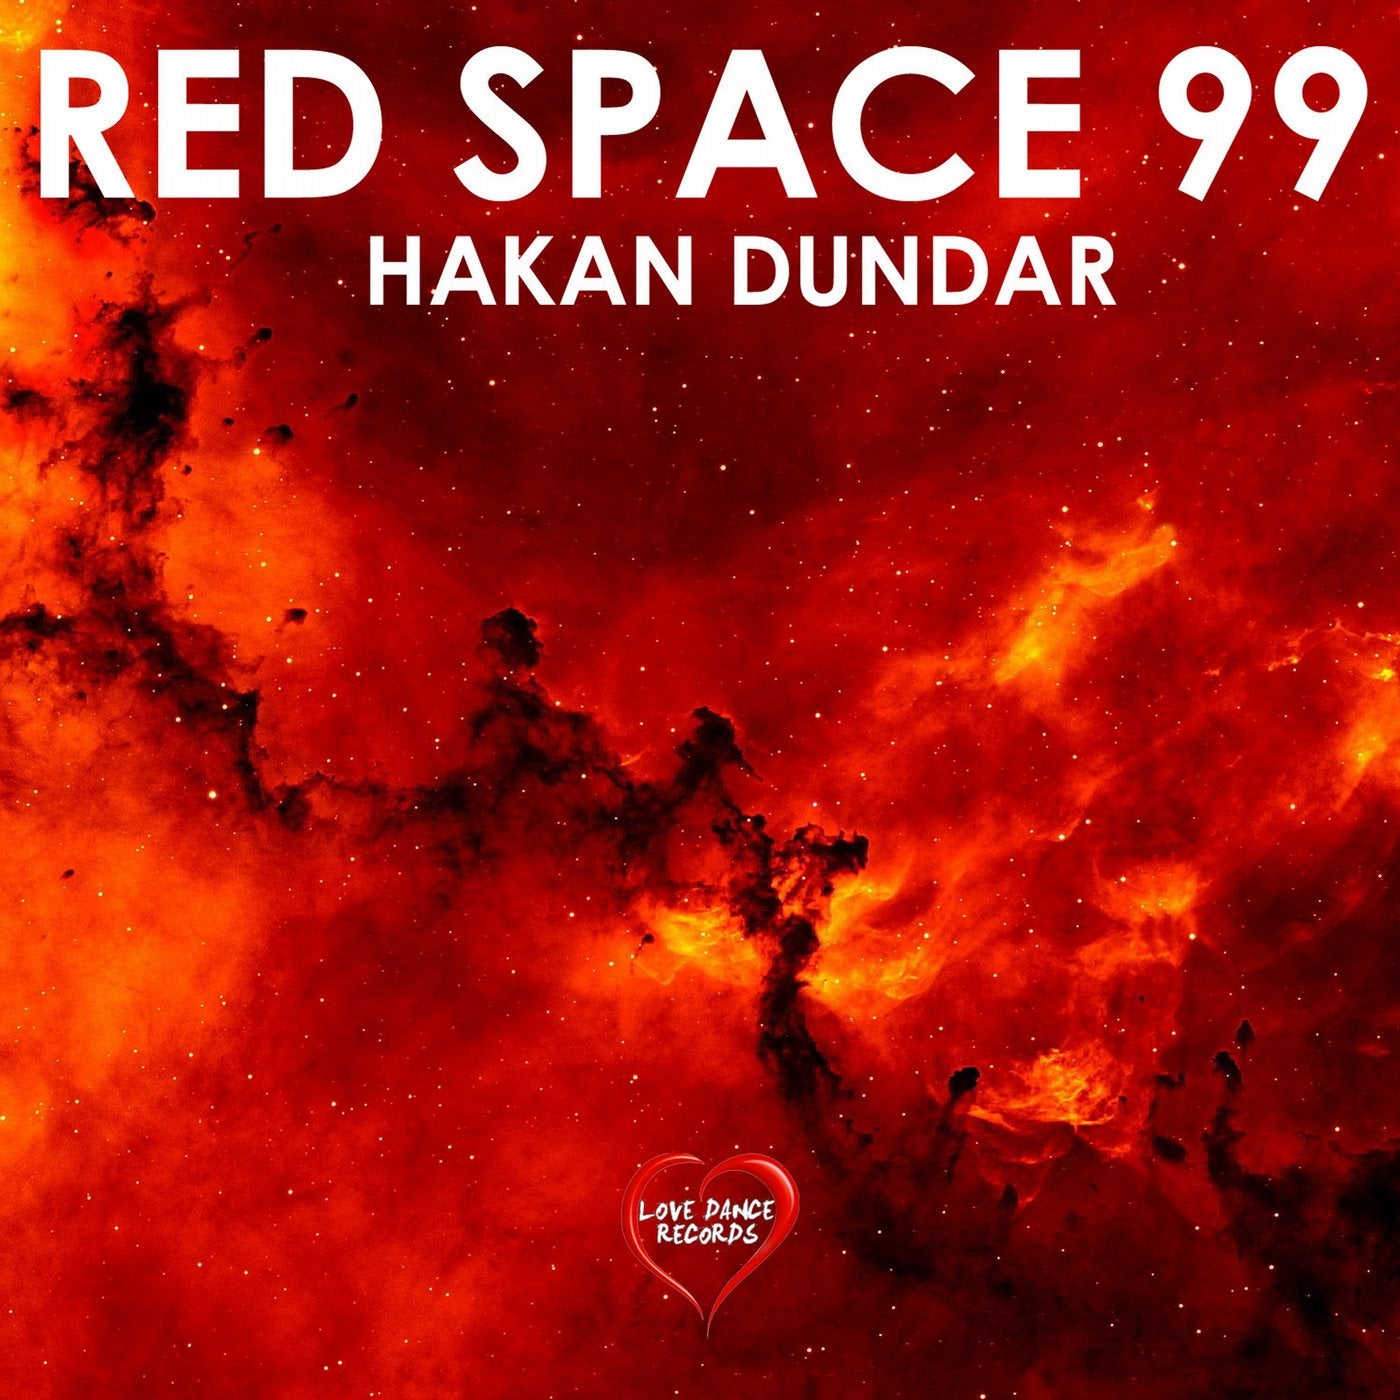 Red Space 99